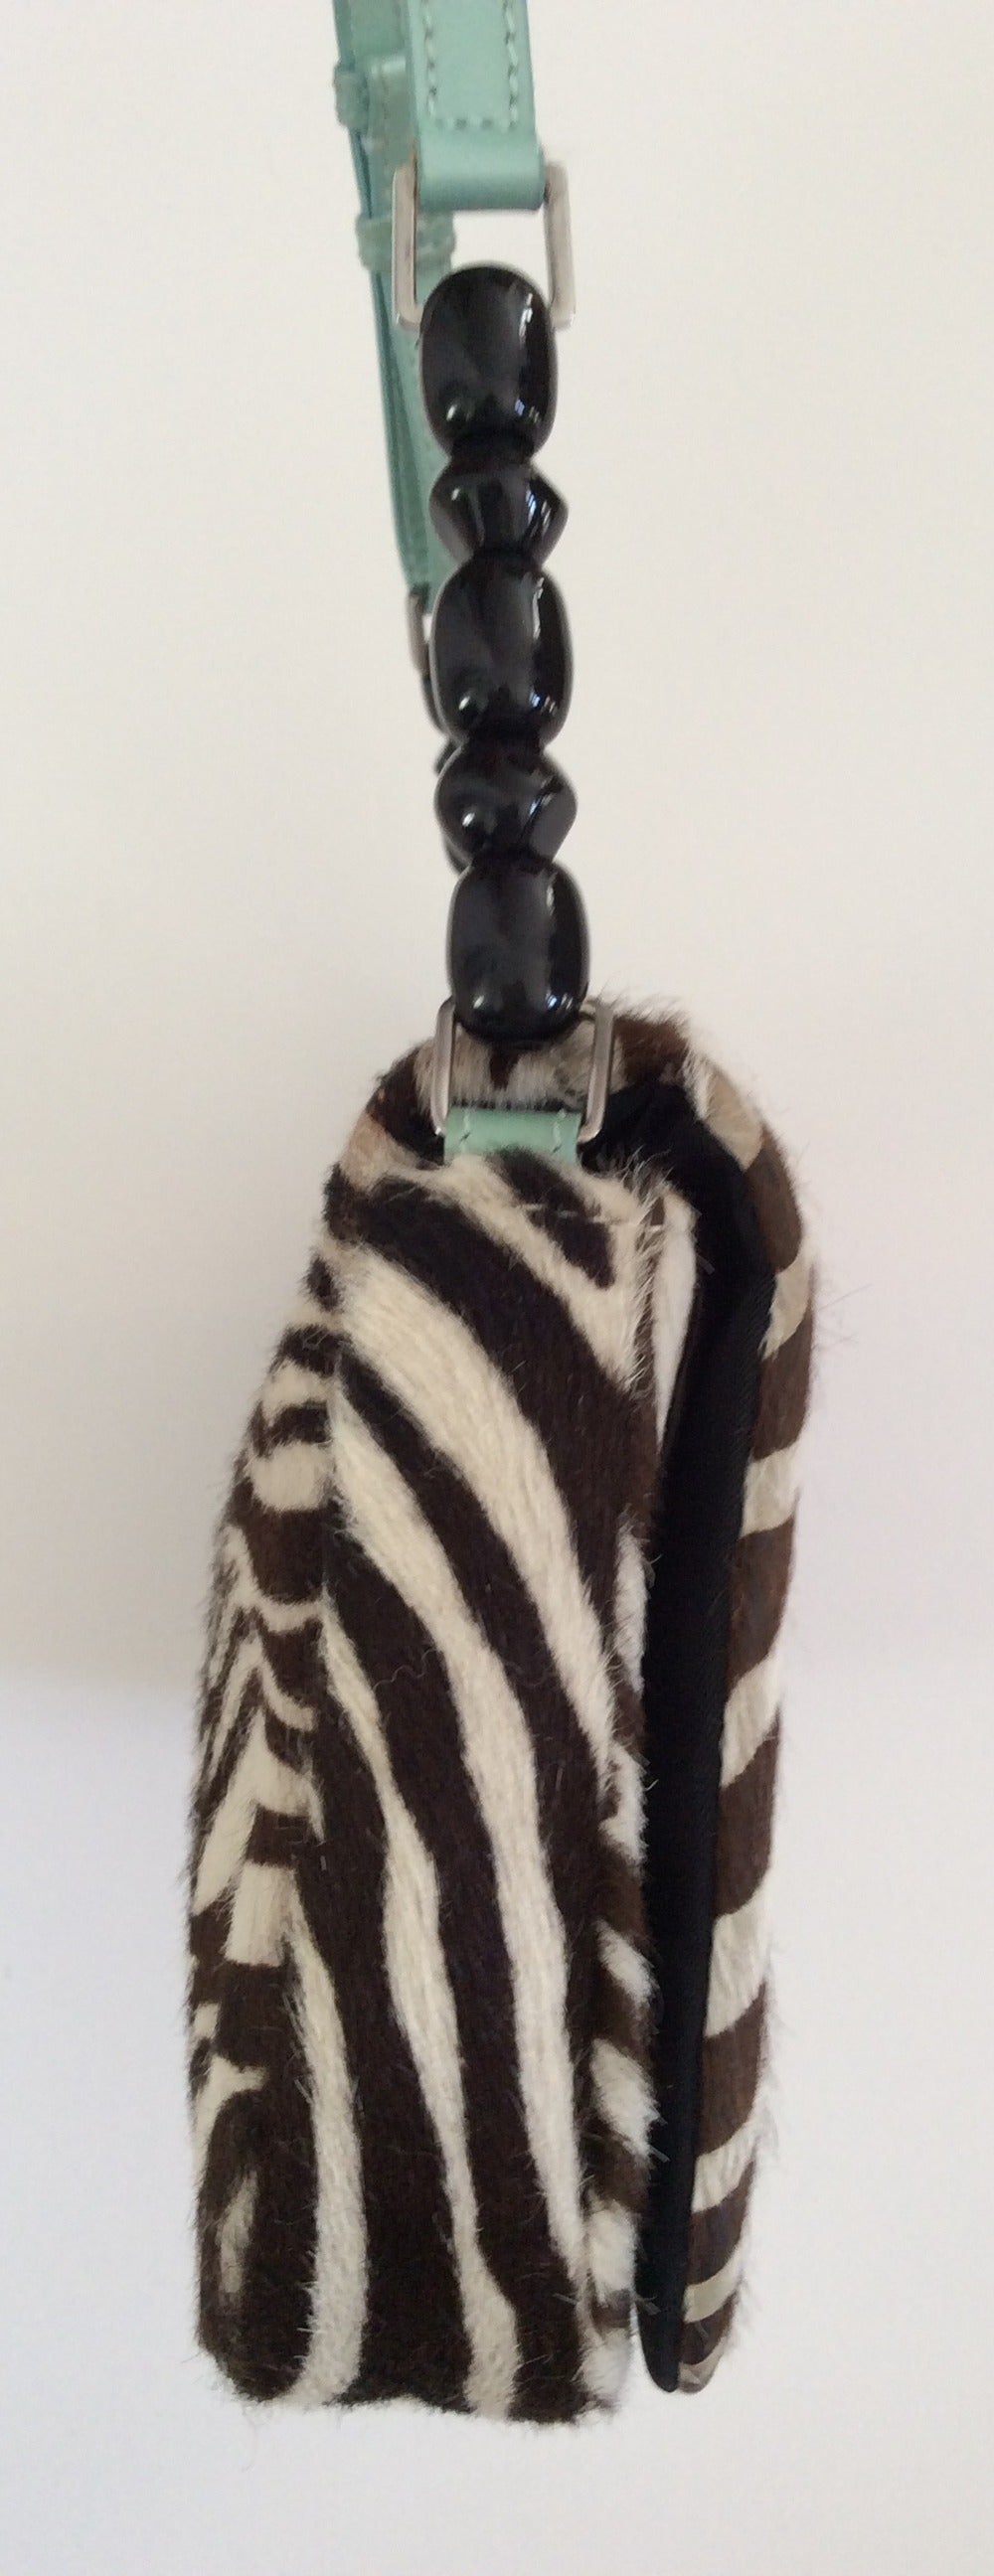 This Christian Dior extremely rare 3 piece set consists of a beautiful brown and zebra print pony fur purse which comes with a matching wallet and matching cross body cell phone bag. All are in good condition and show minor signs of use and wear.